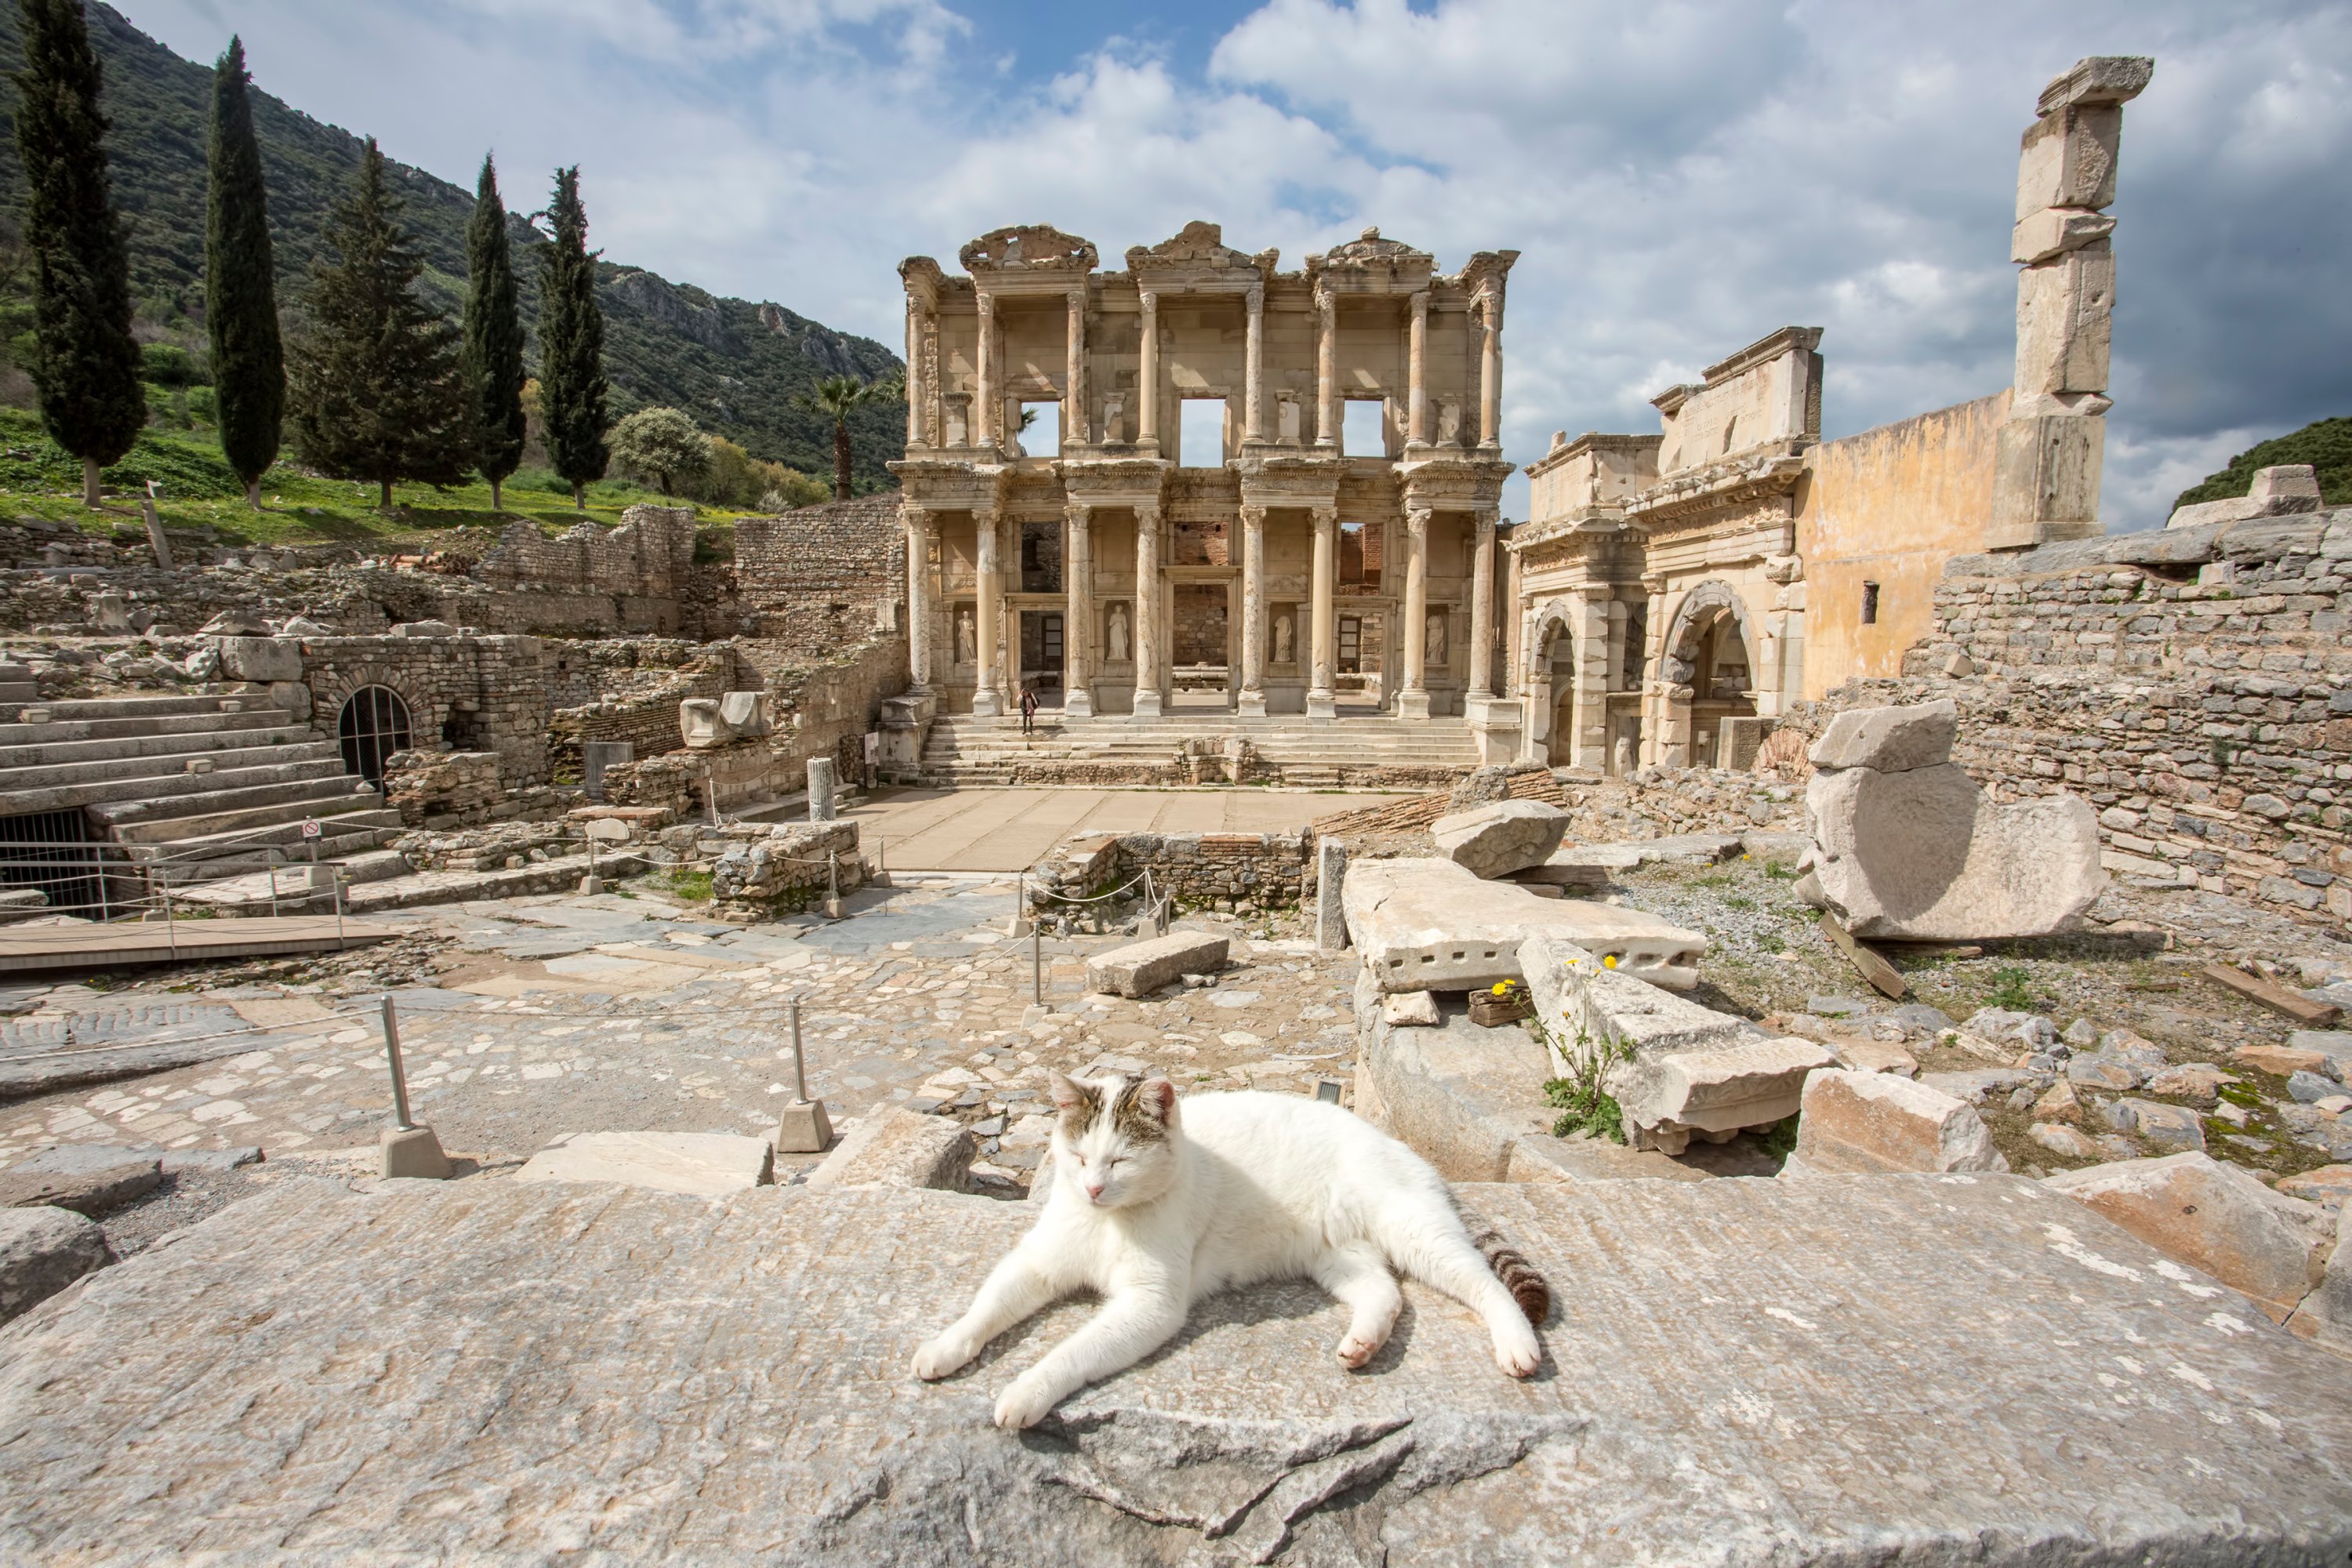 While walking in the streets of Ephesus, you